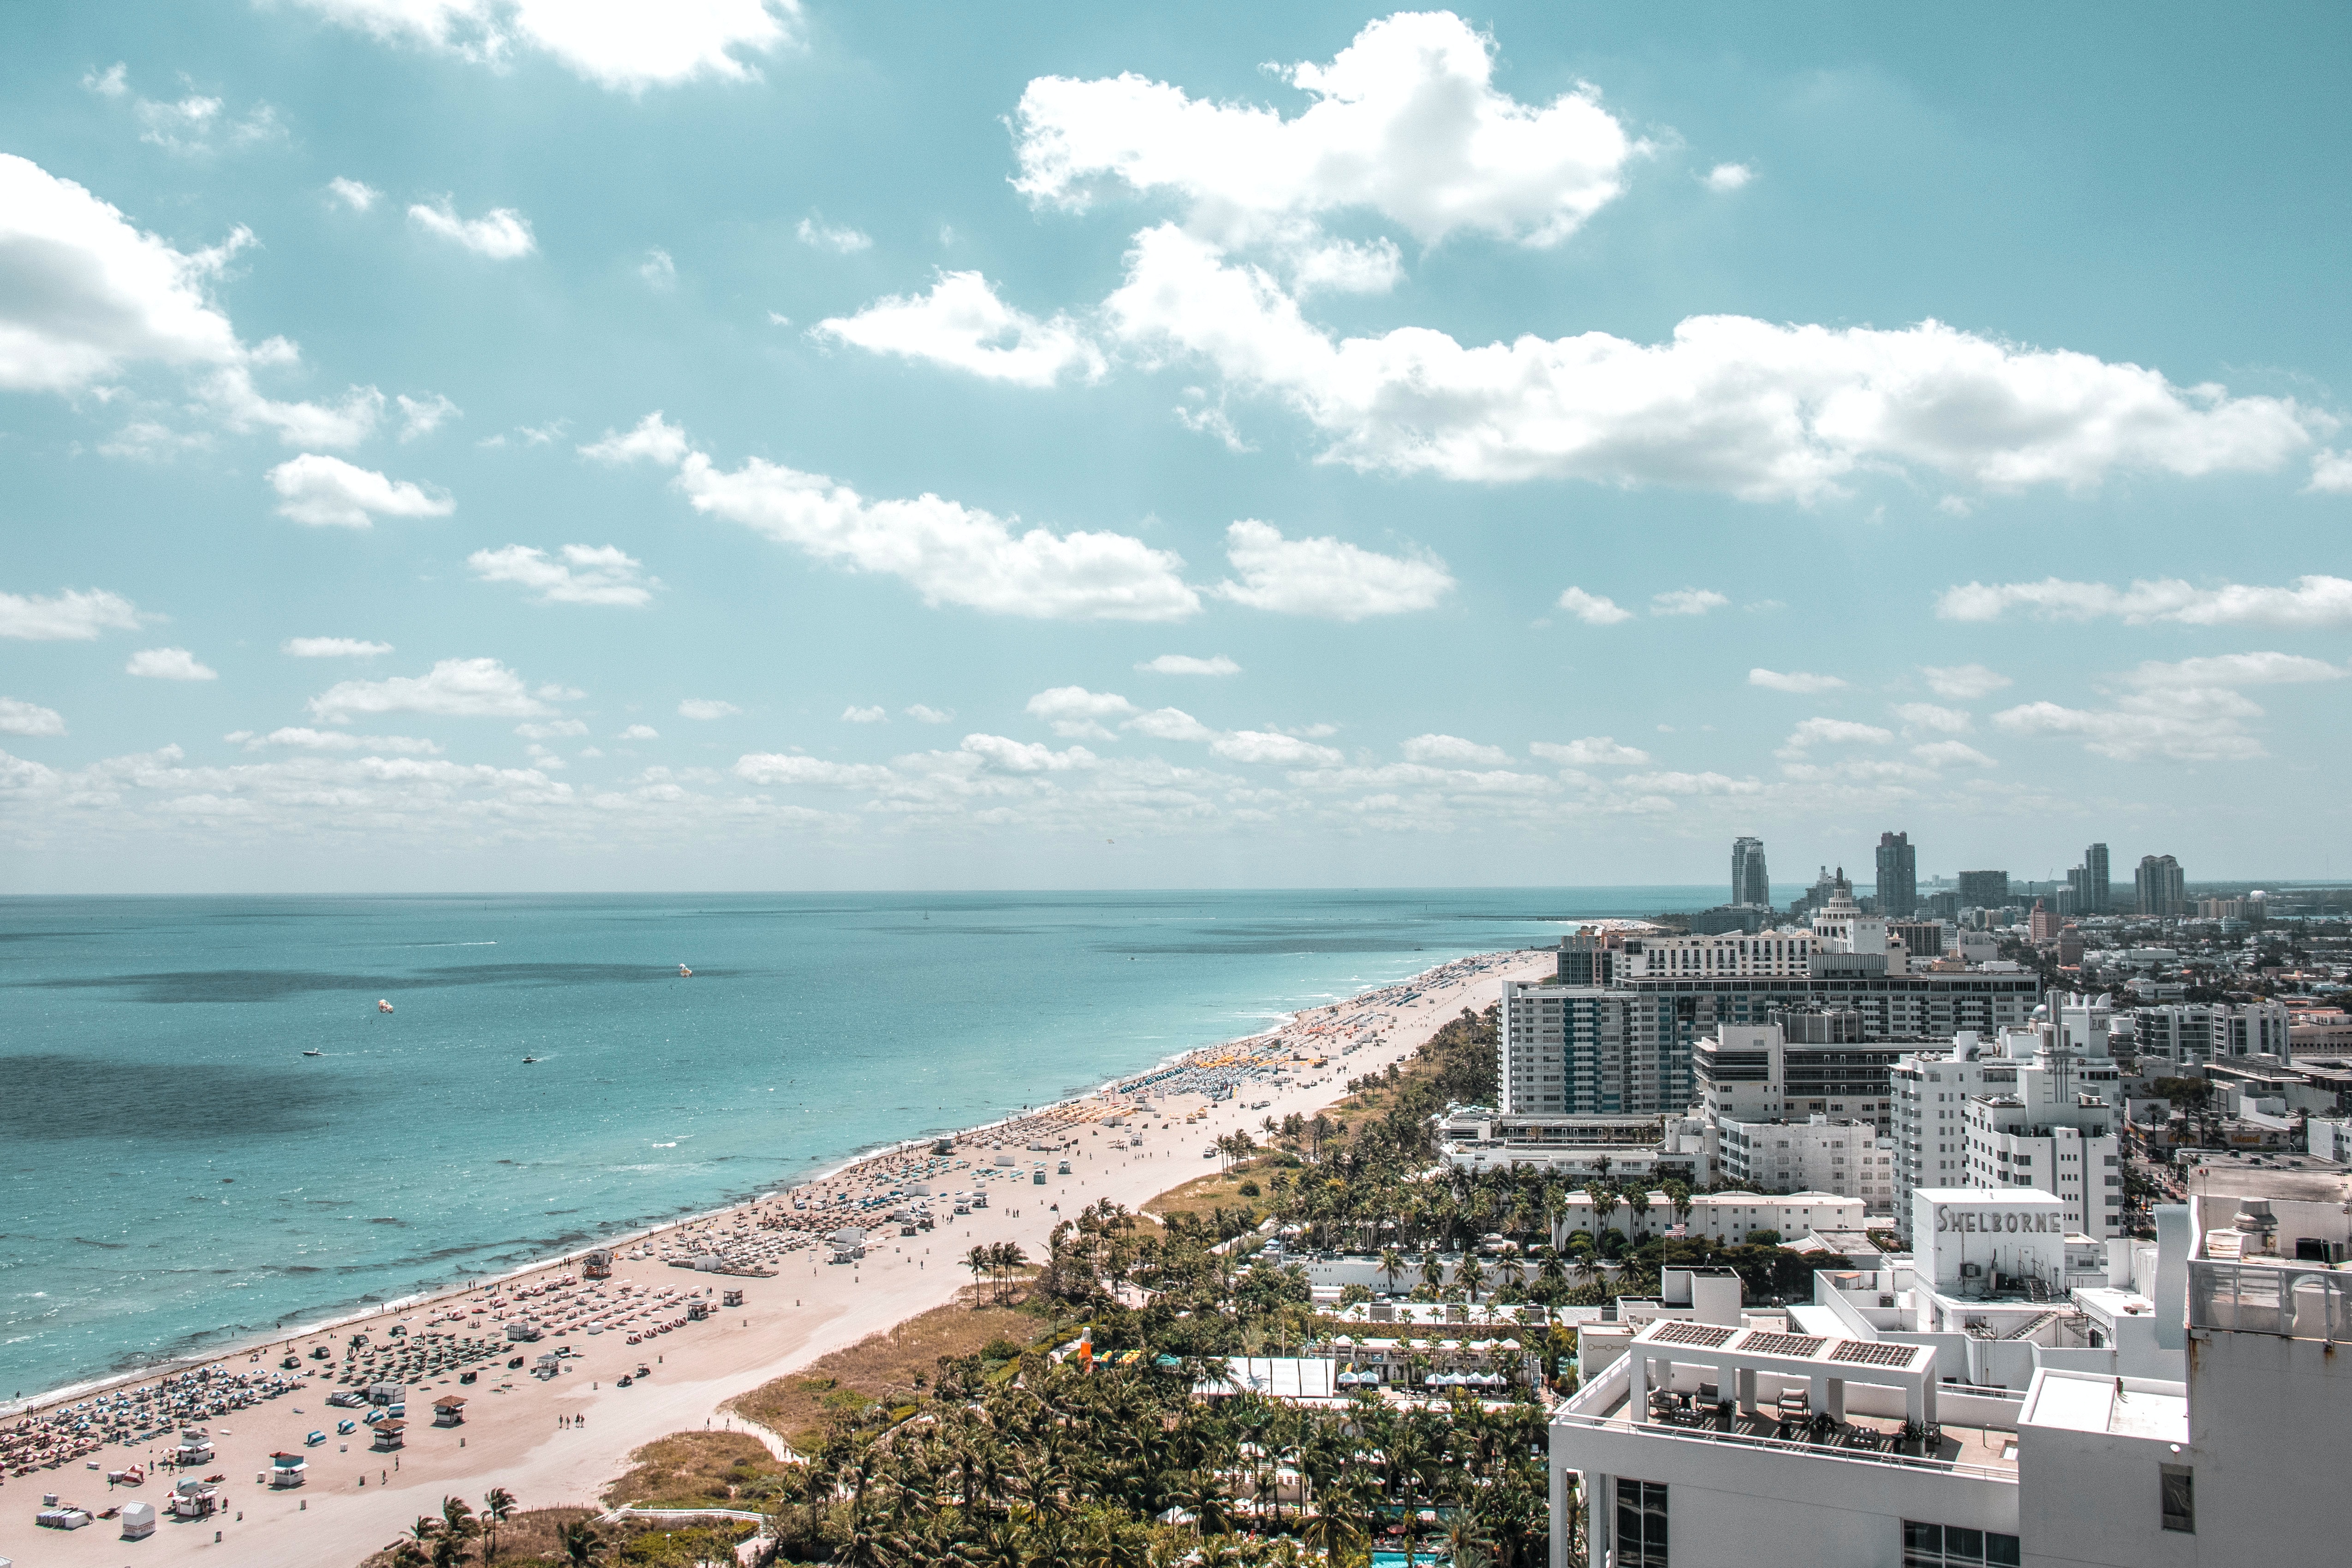 Miami Beach Vacation Box Sweepstakes - Official Rules